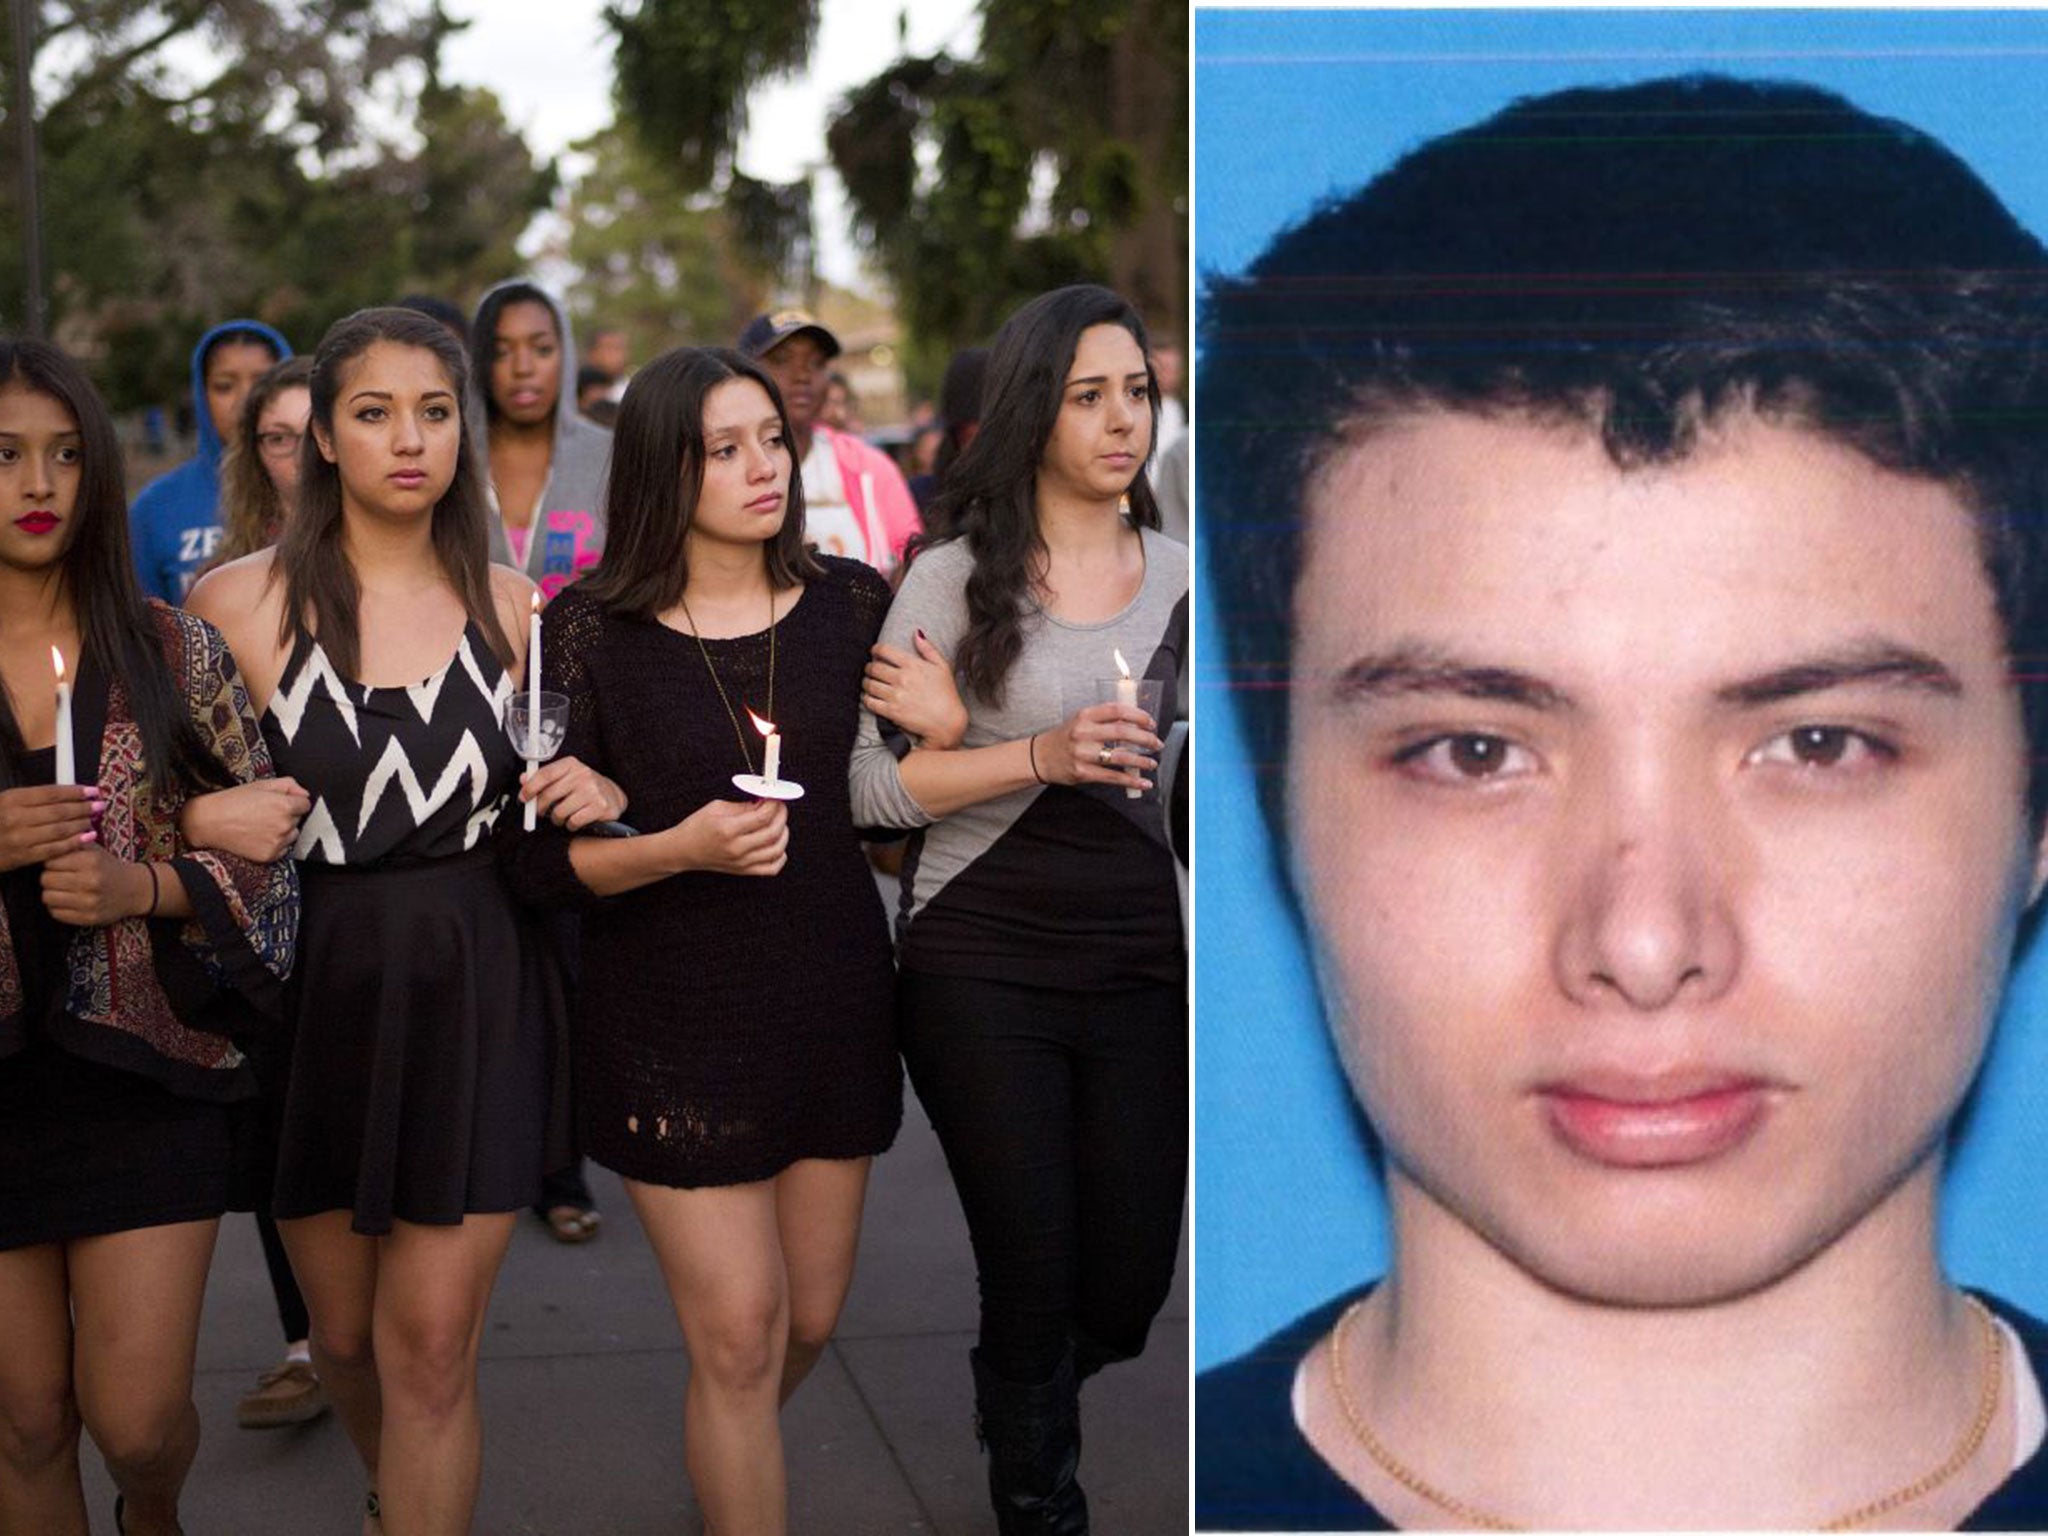 British born Elliot Rodger, right, murdered six students during a stabbing and shooting spree 